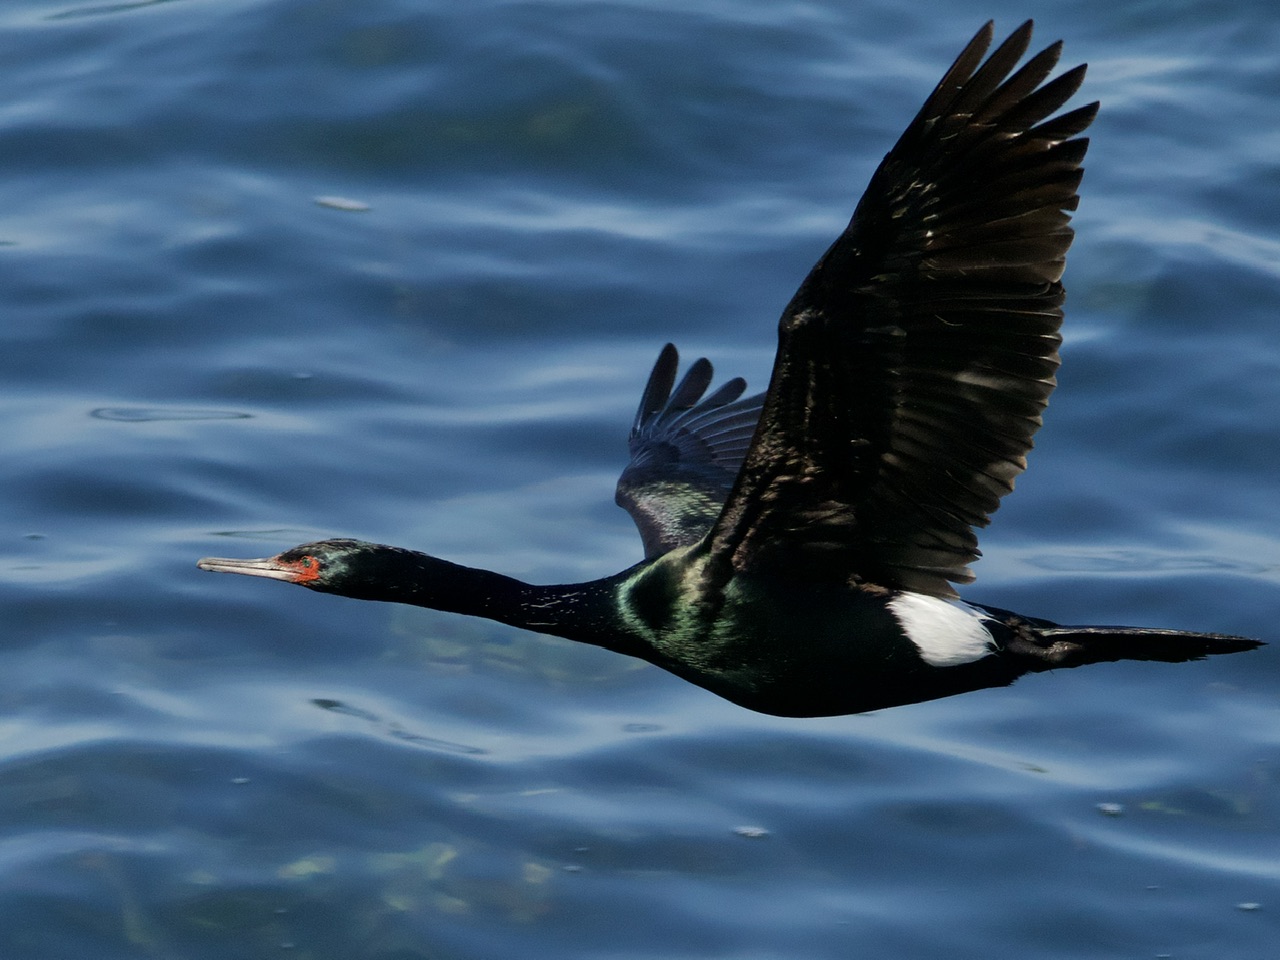 Pelagic Cormorant Flying with White Patch Visible